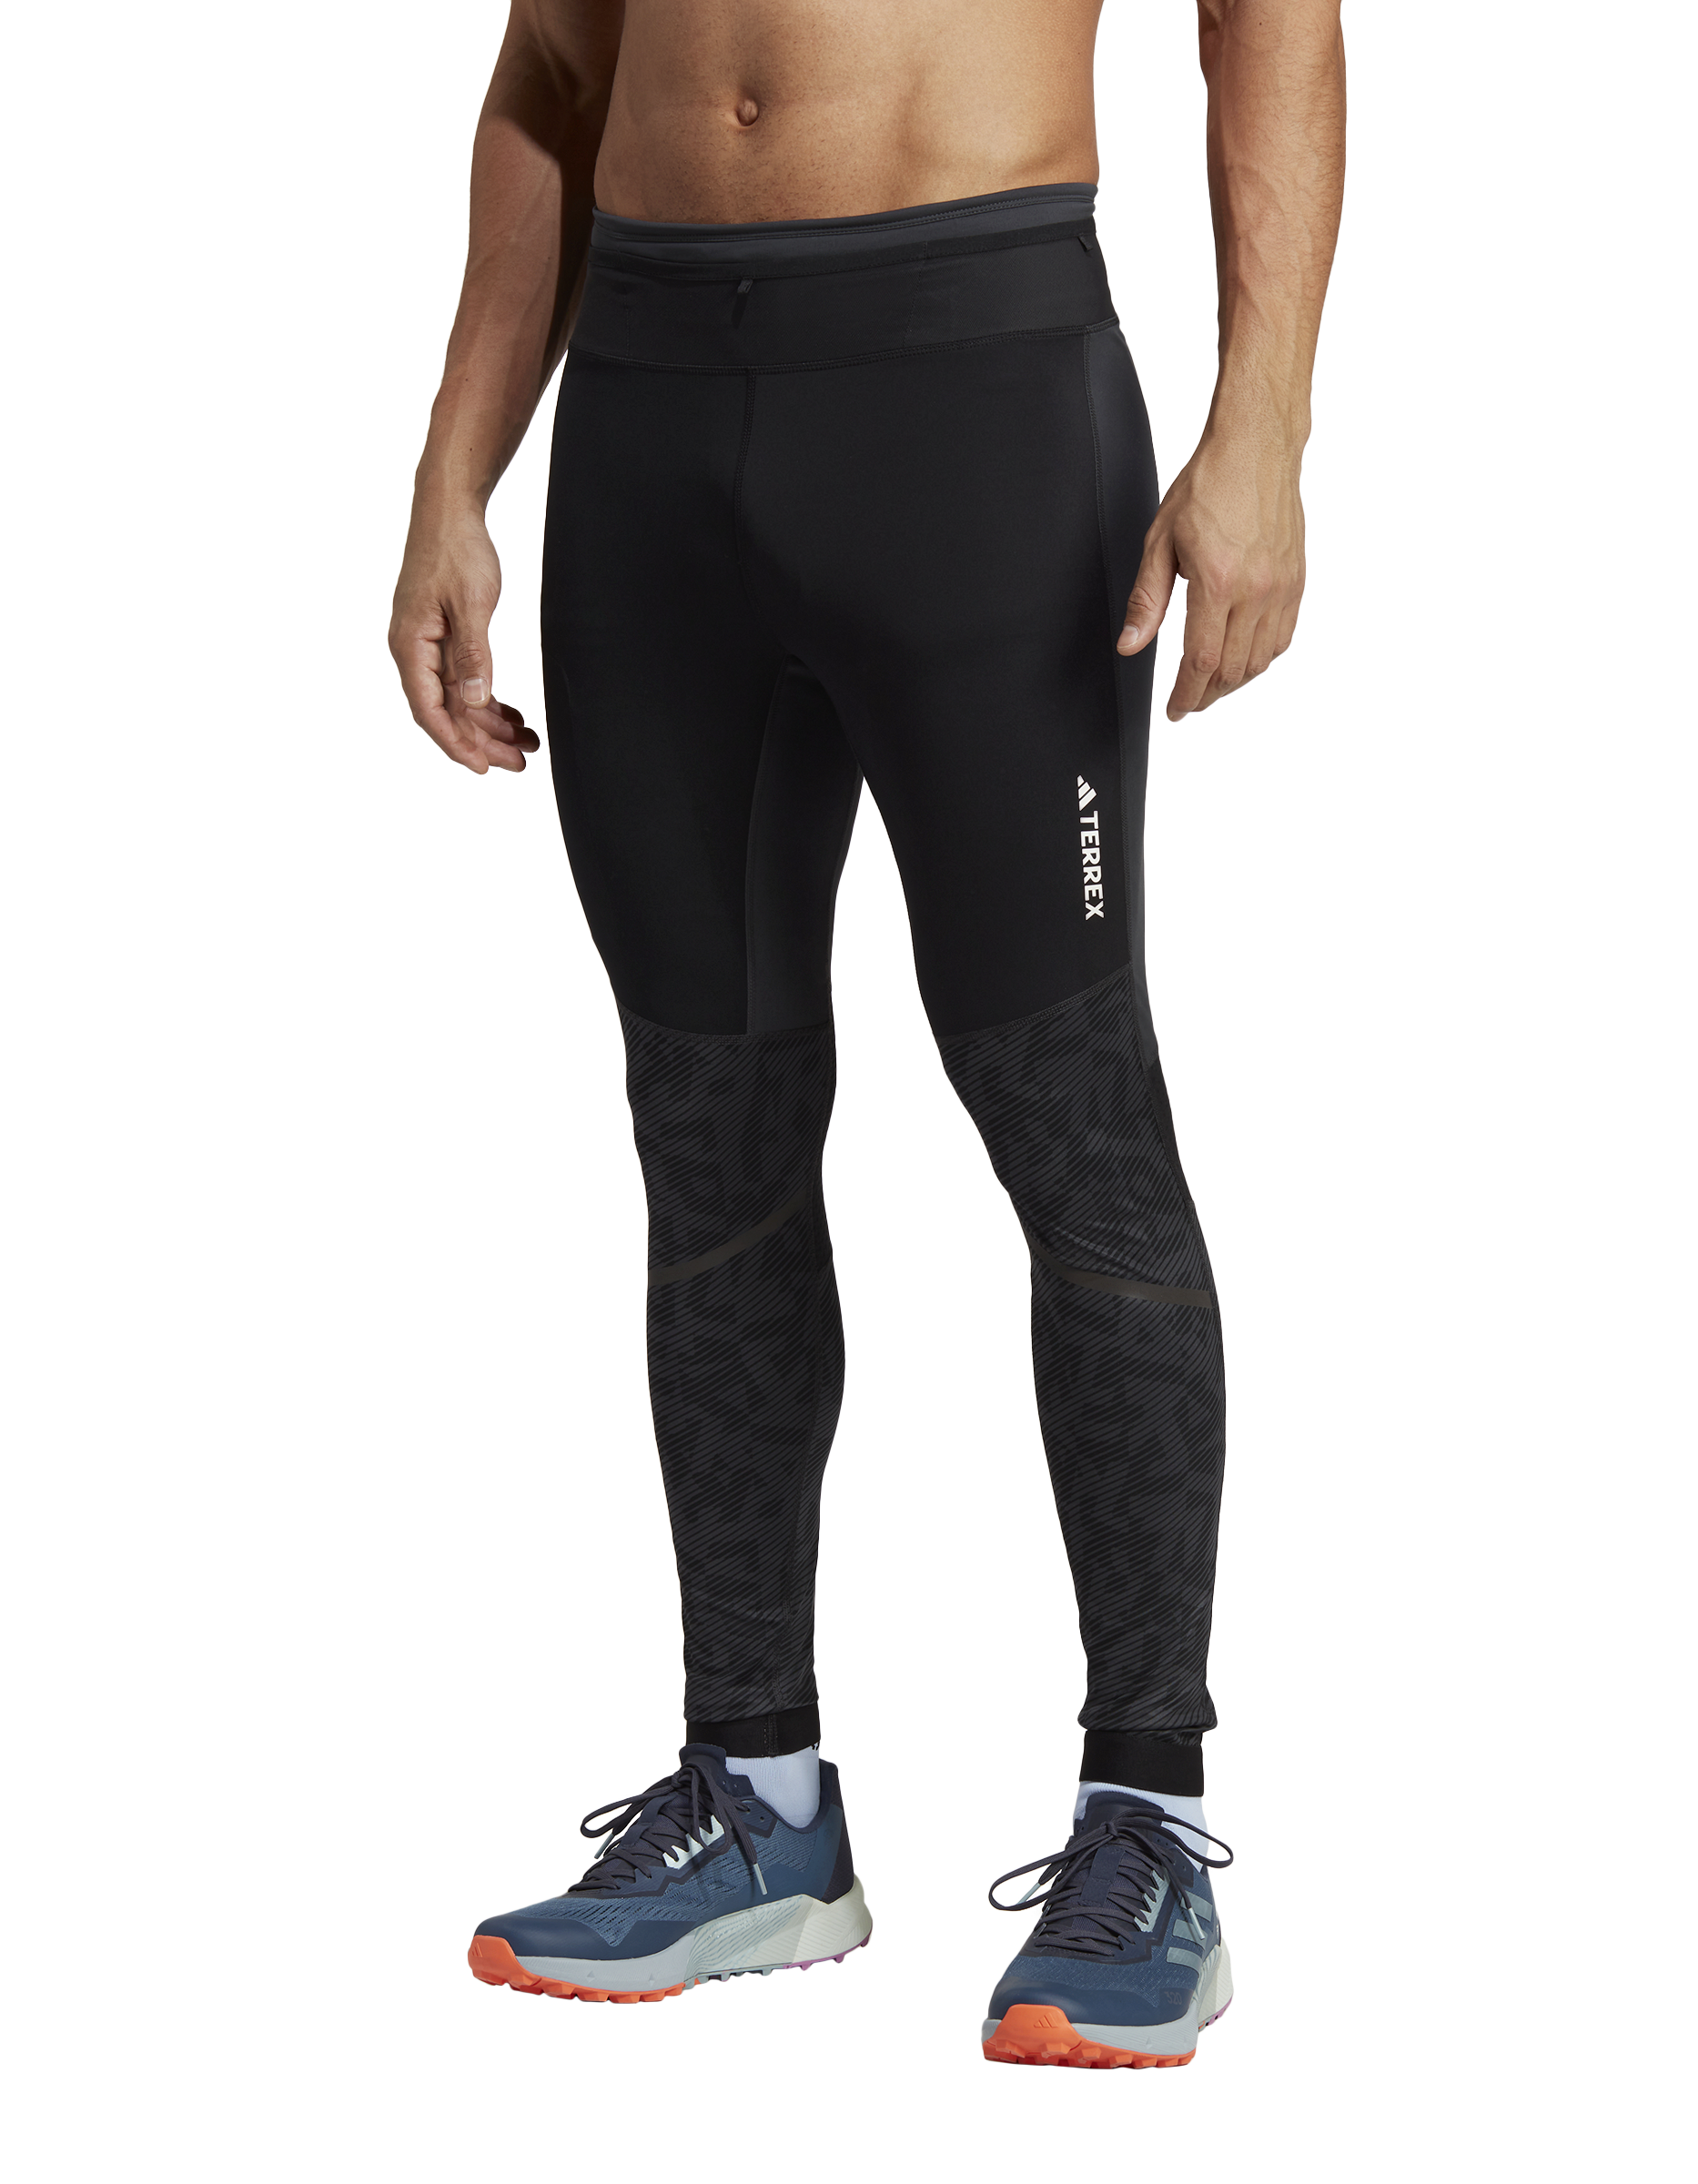 Compression Tights in Black Recycled Fabric